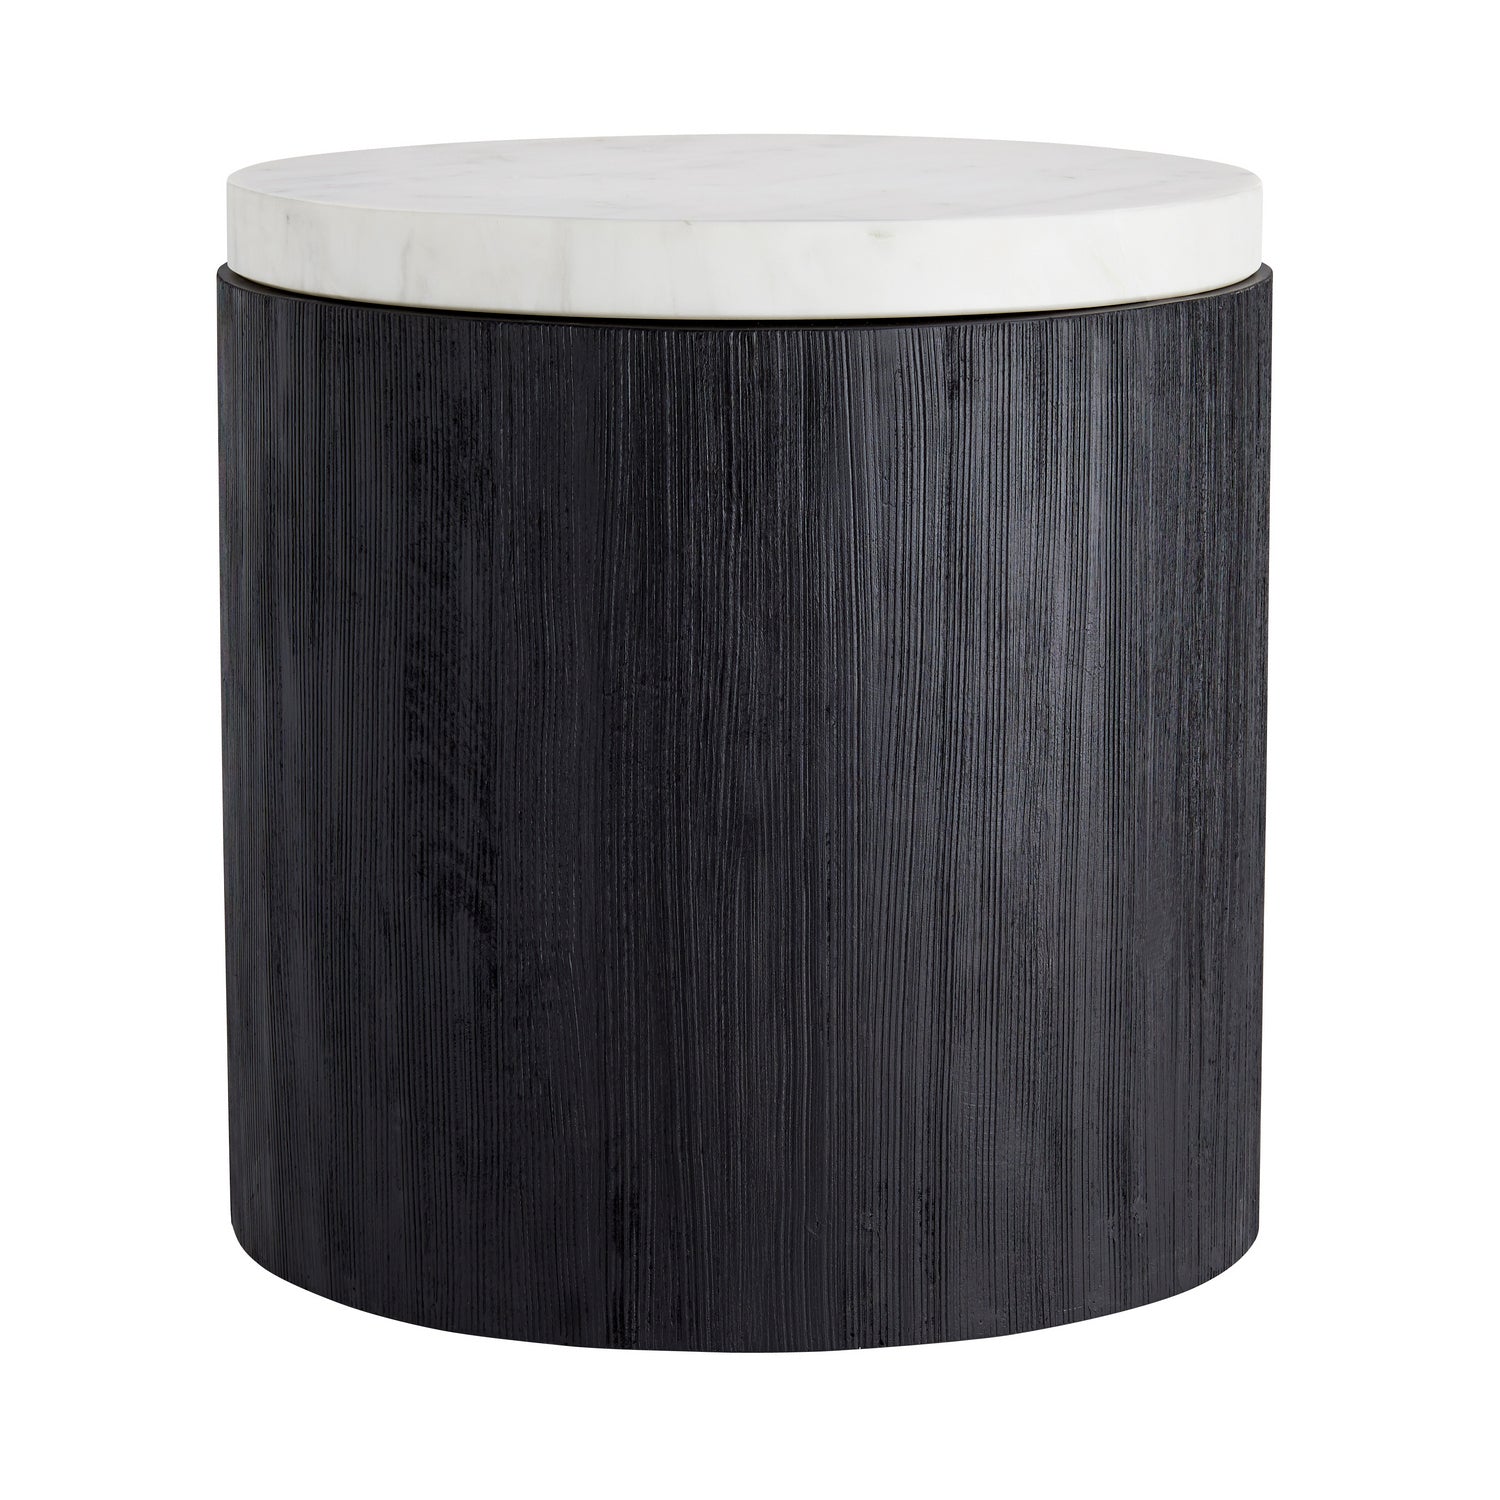 Side Table from the Gregor collection in White finish